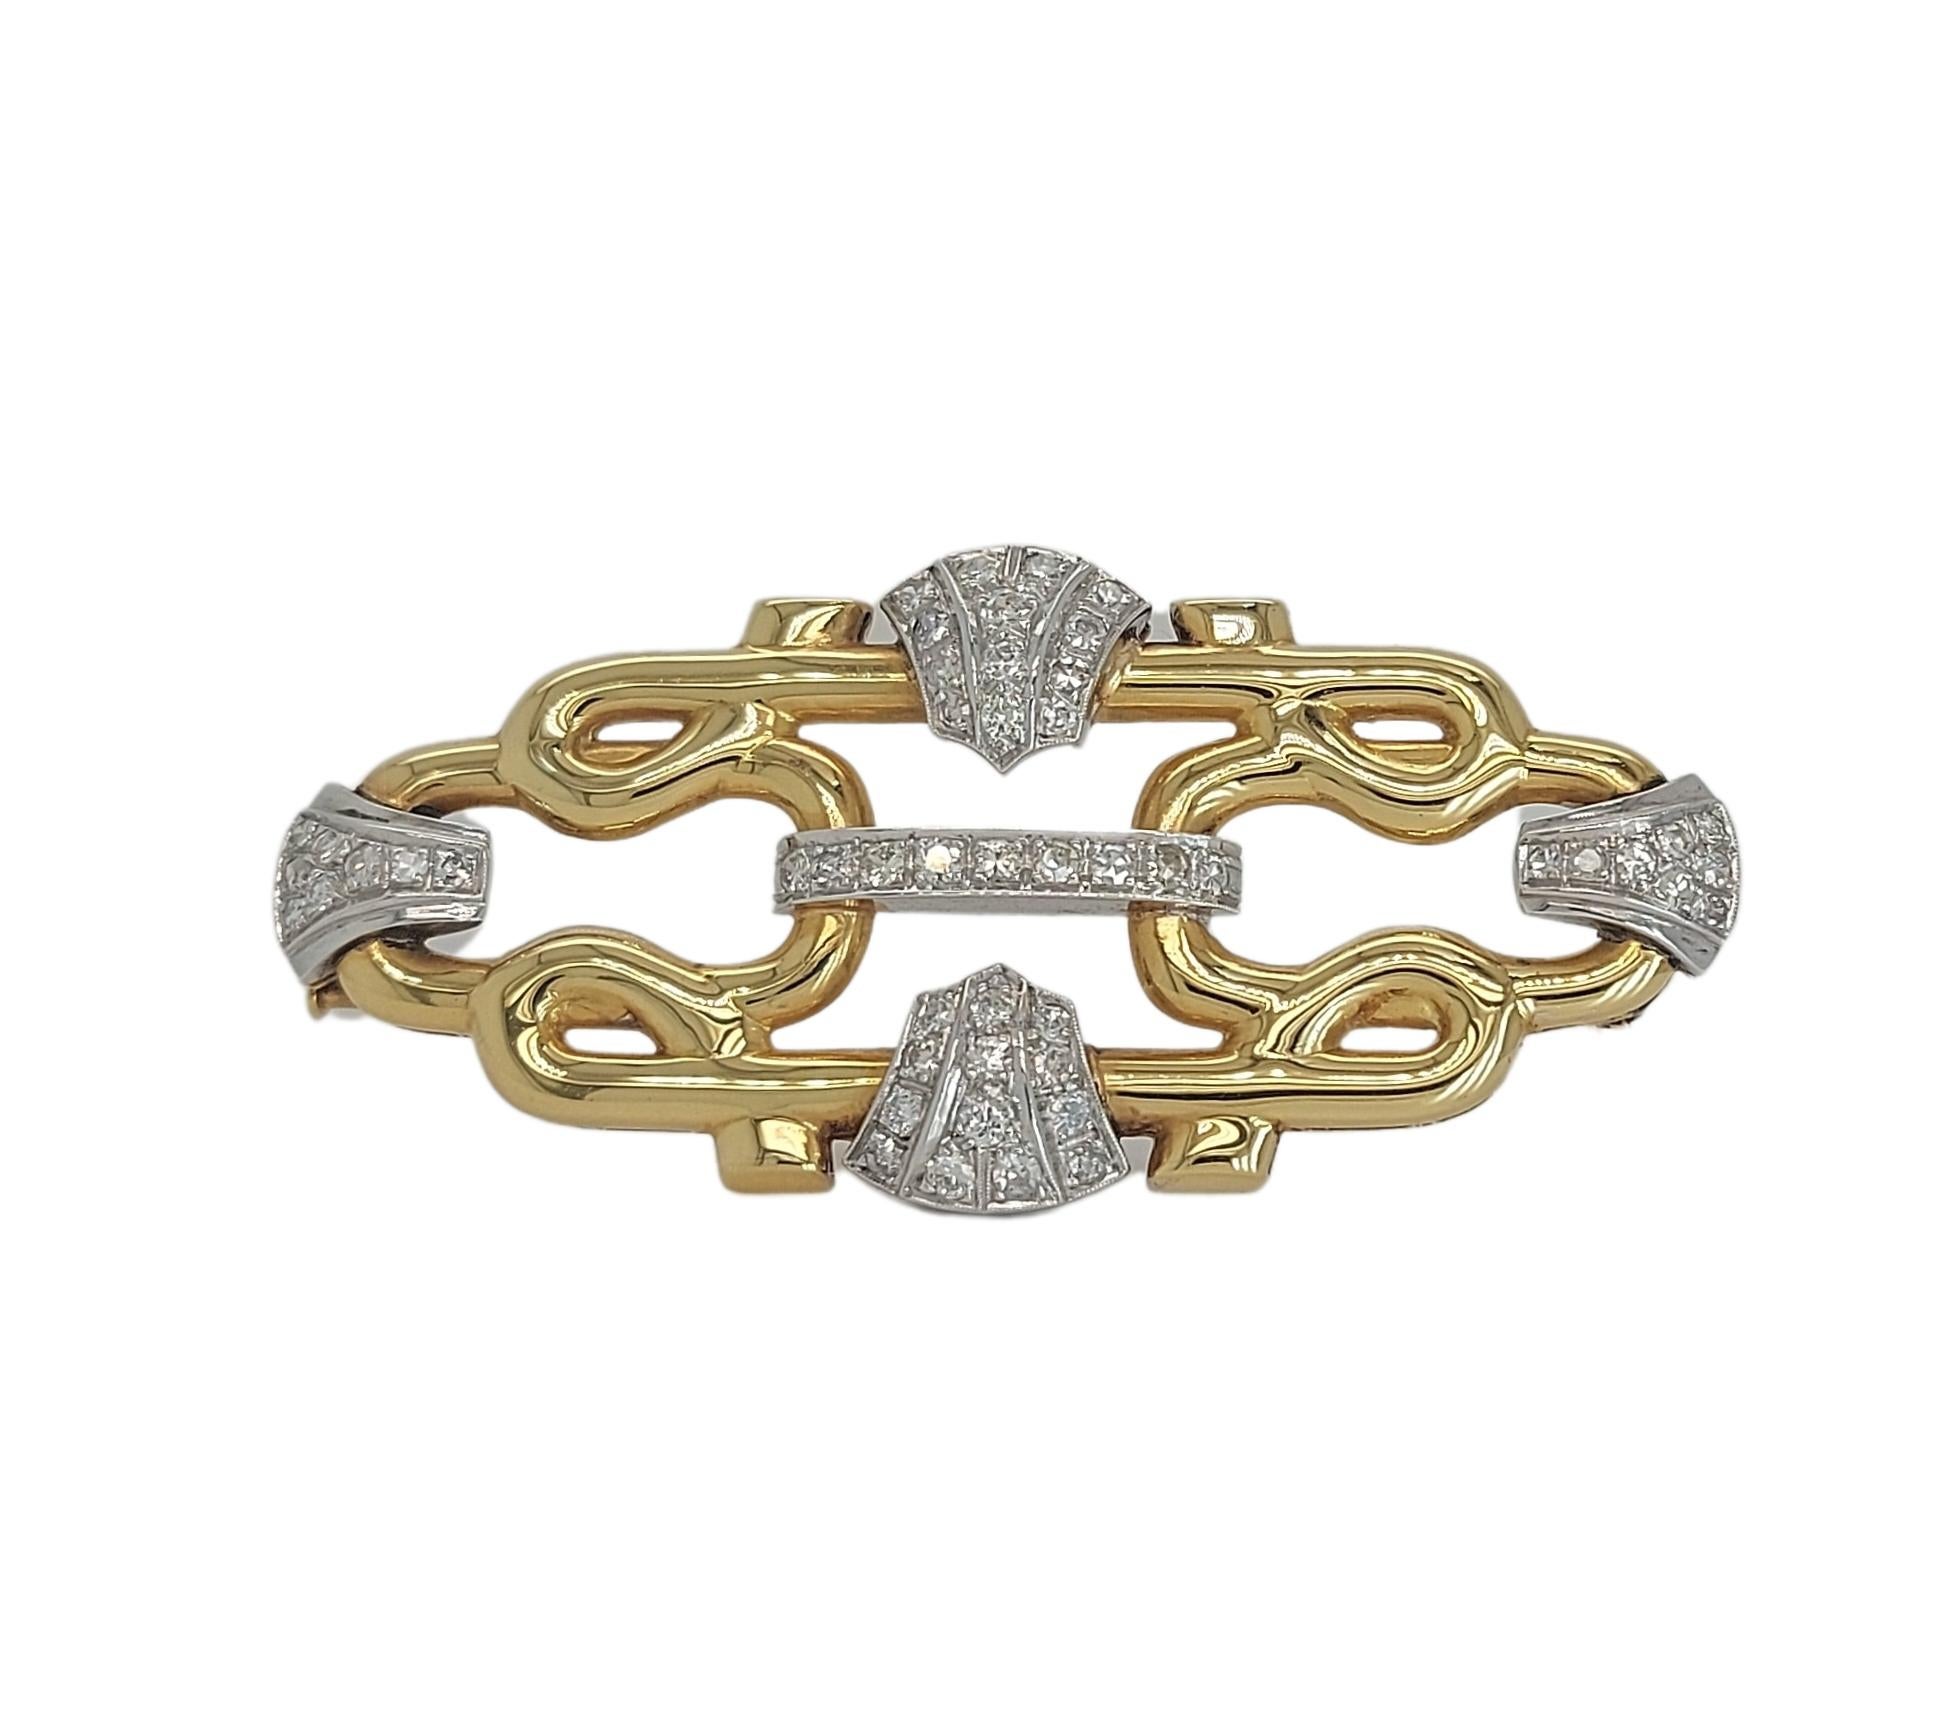 Gorgeous 18kt Yellow and White Gold Brooch with 1.2ct Diamonds

Diamonds: 51 brilliant cut diamonds together 1.2ct

Material: 18kt yellow and white gold

Total weight: 13.2 grams / 0.465 oz / 8.5 dwt

Measurements: 60 mm x 27.60 mm x 8 mm